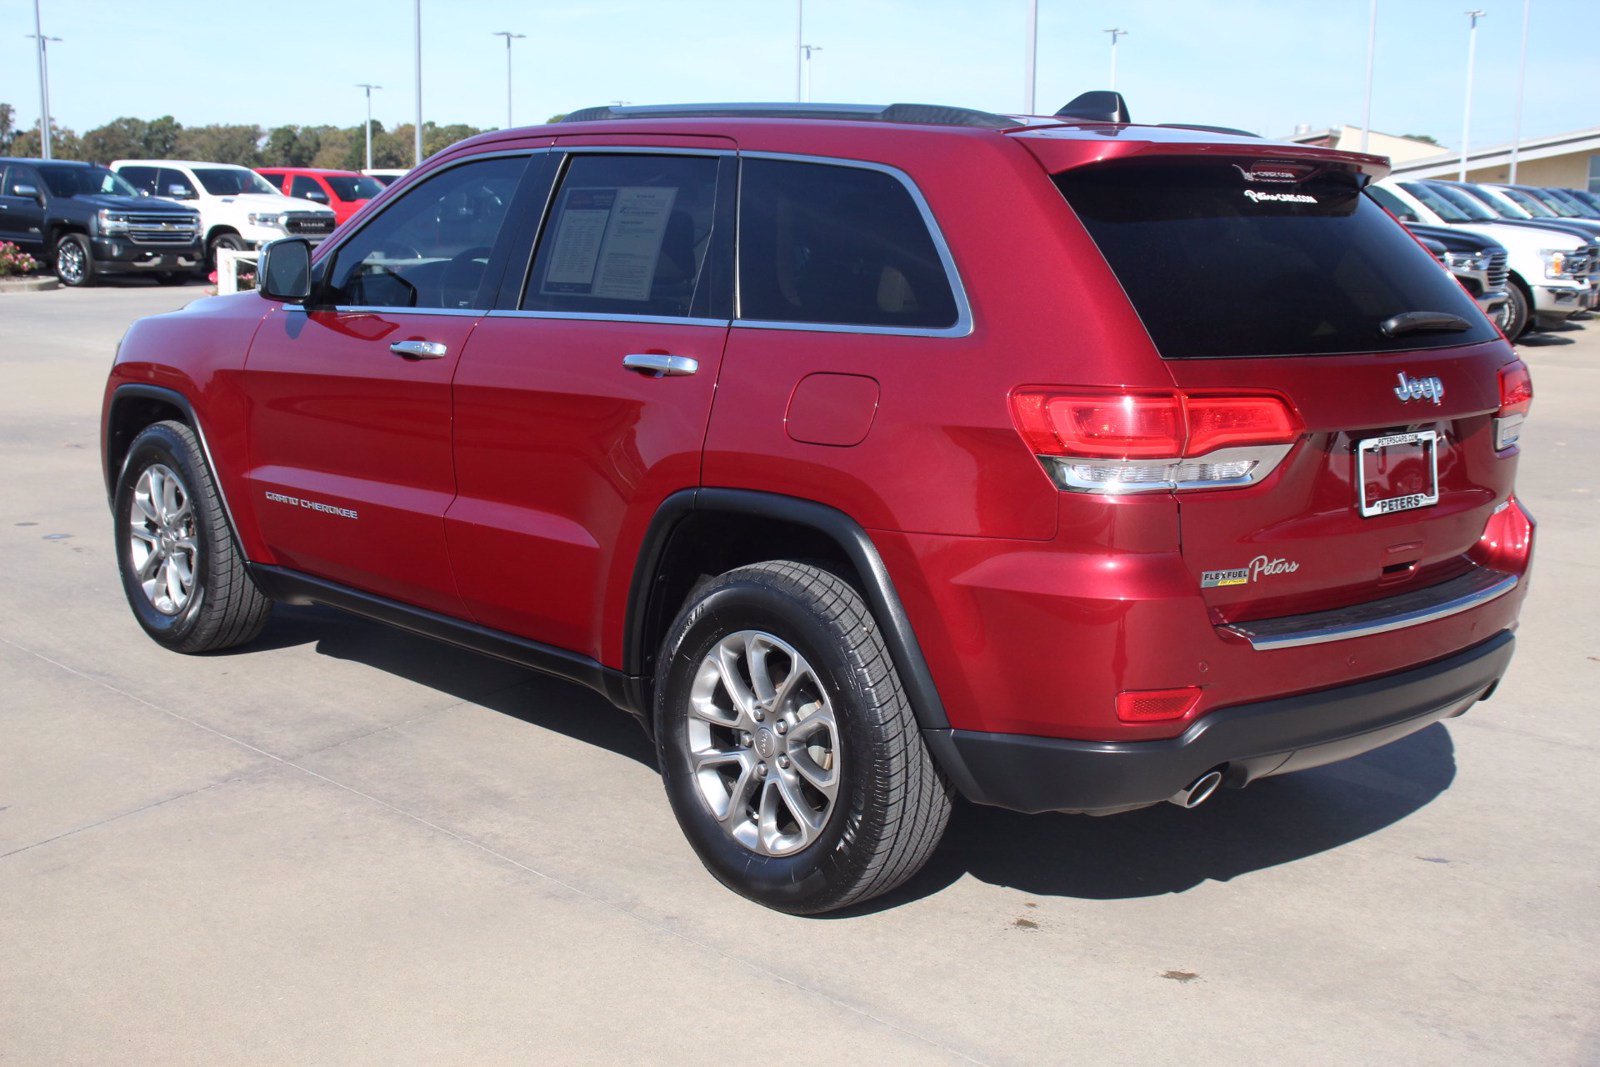 Pre-Owned 2014 Jeep Grand Cherokee Limited SUV in Longview #20C1290A 2014 Jeep Cherokee Limited V6 Towing Capacity